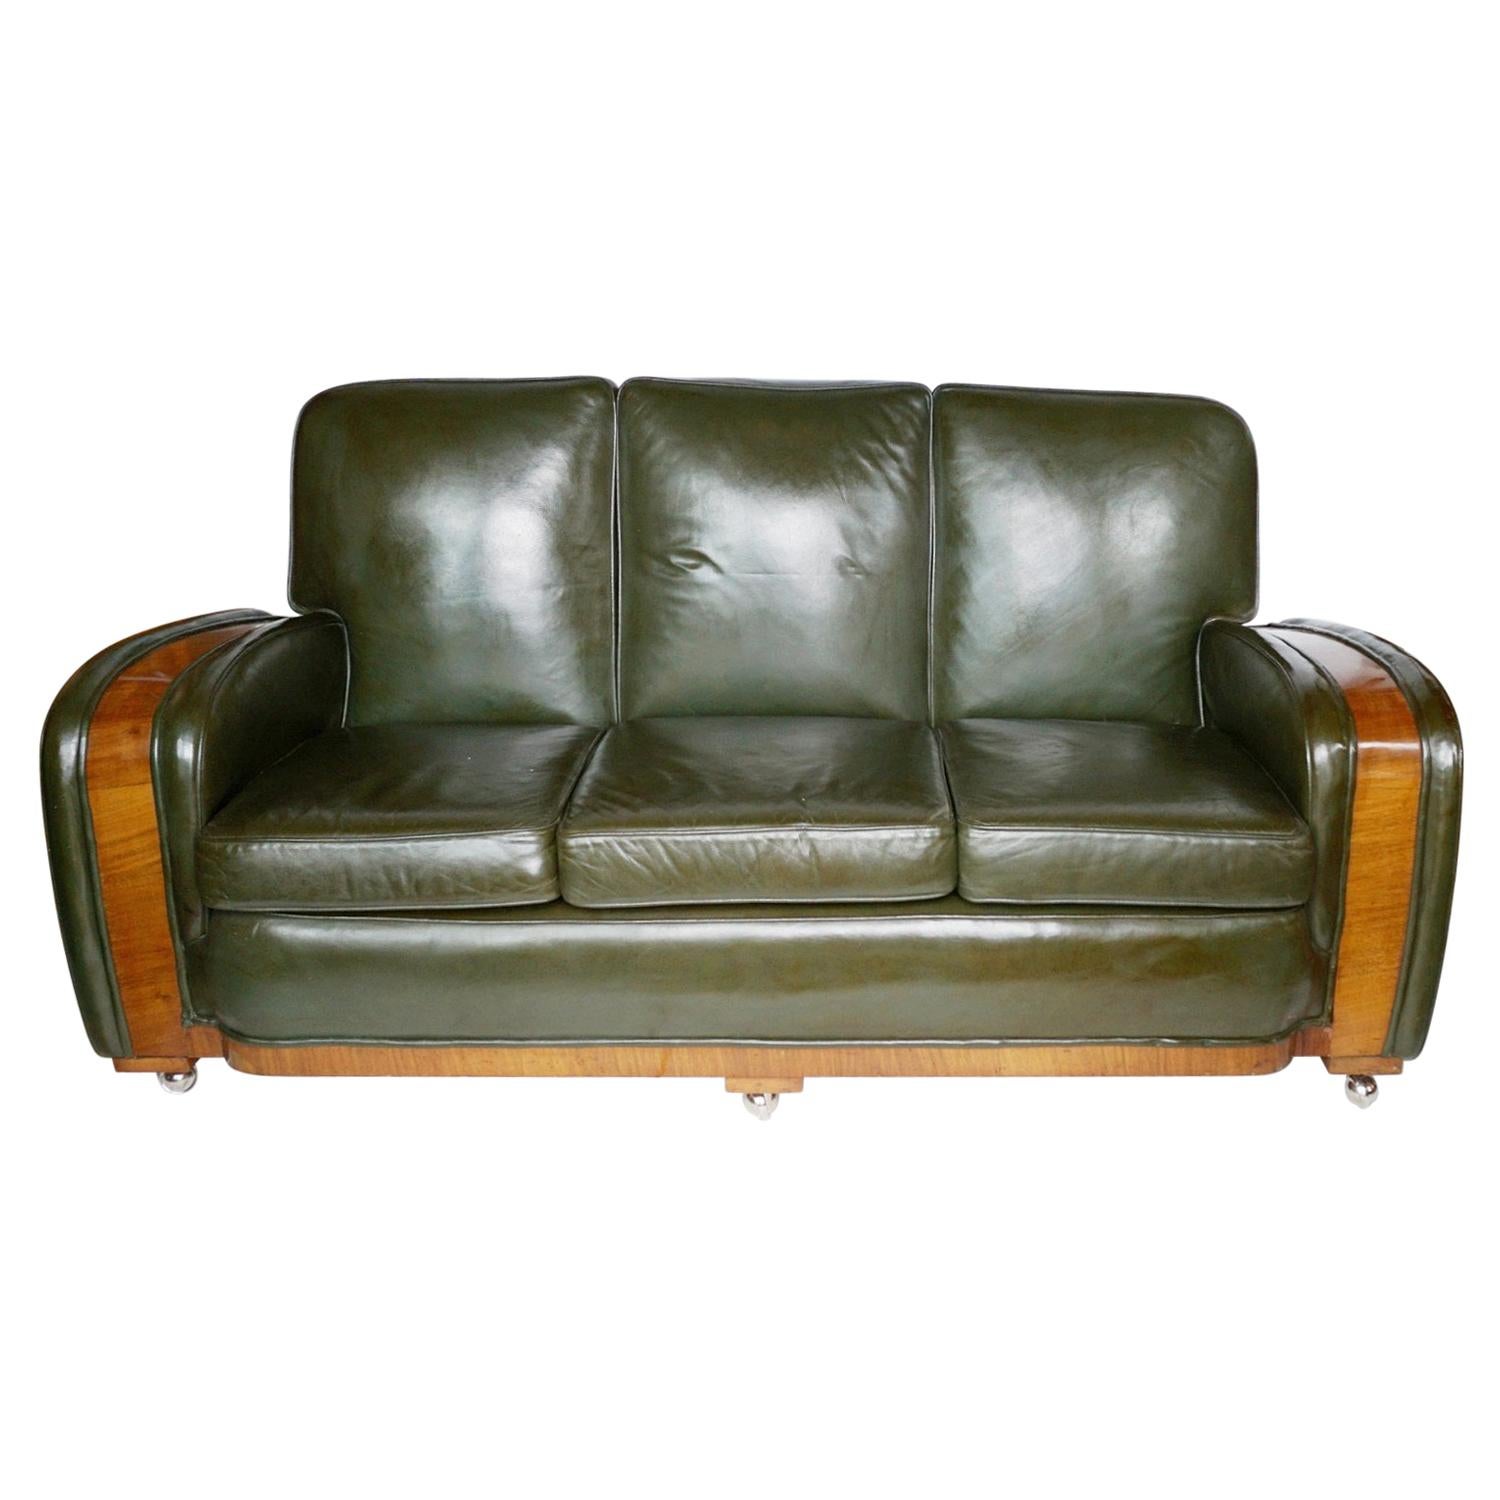 Art Deco Tank Sofa Attributed to Heal's of London